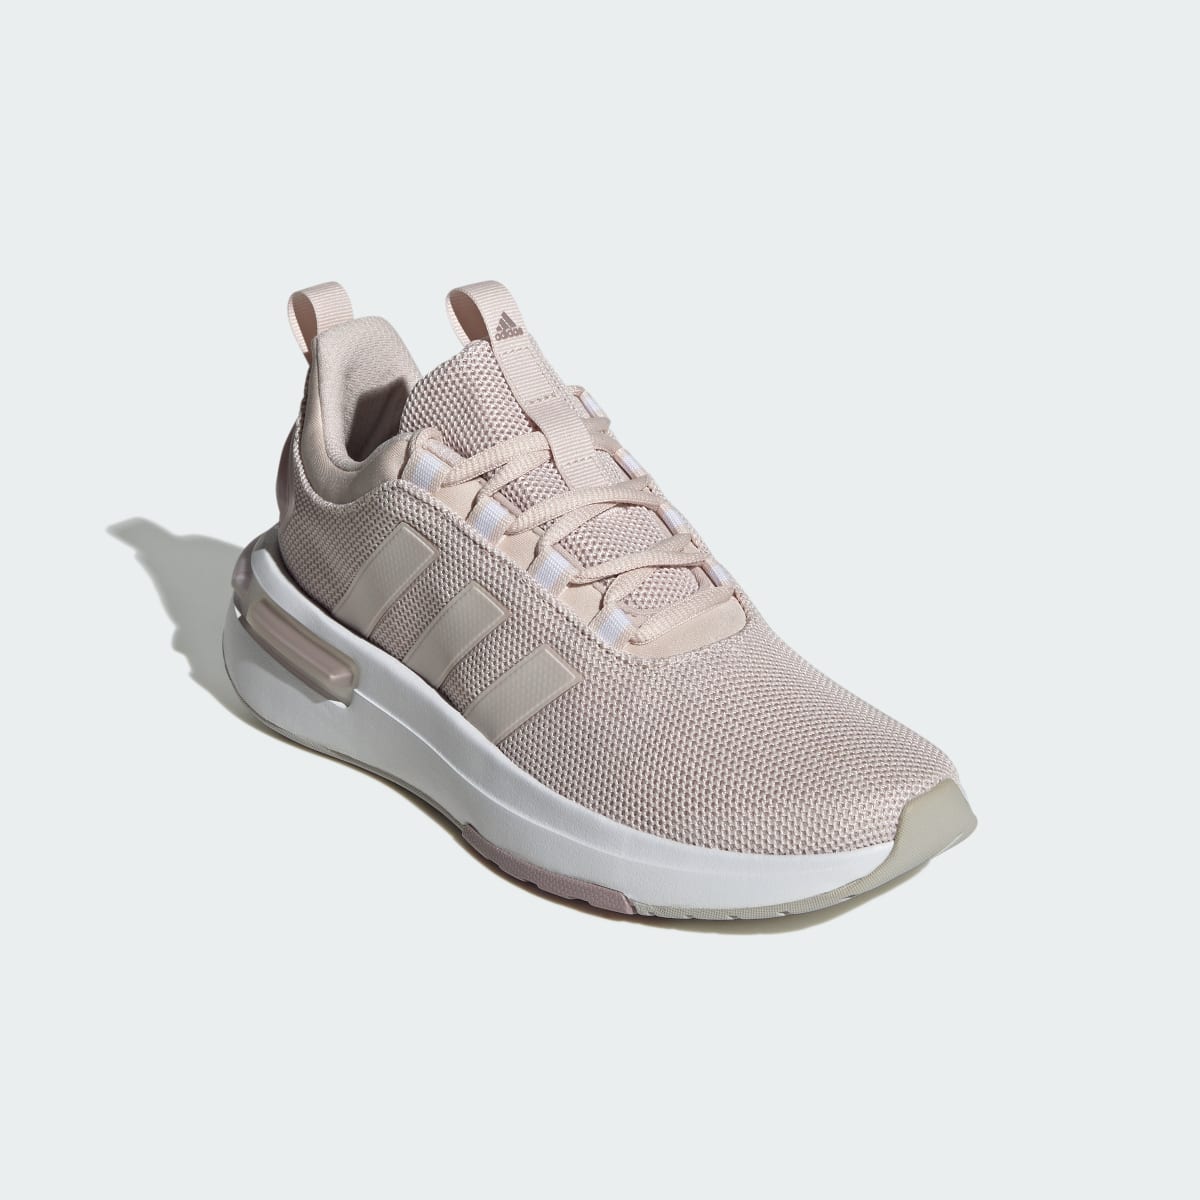 Adidas Racer TR23 Shoes. 5